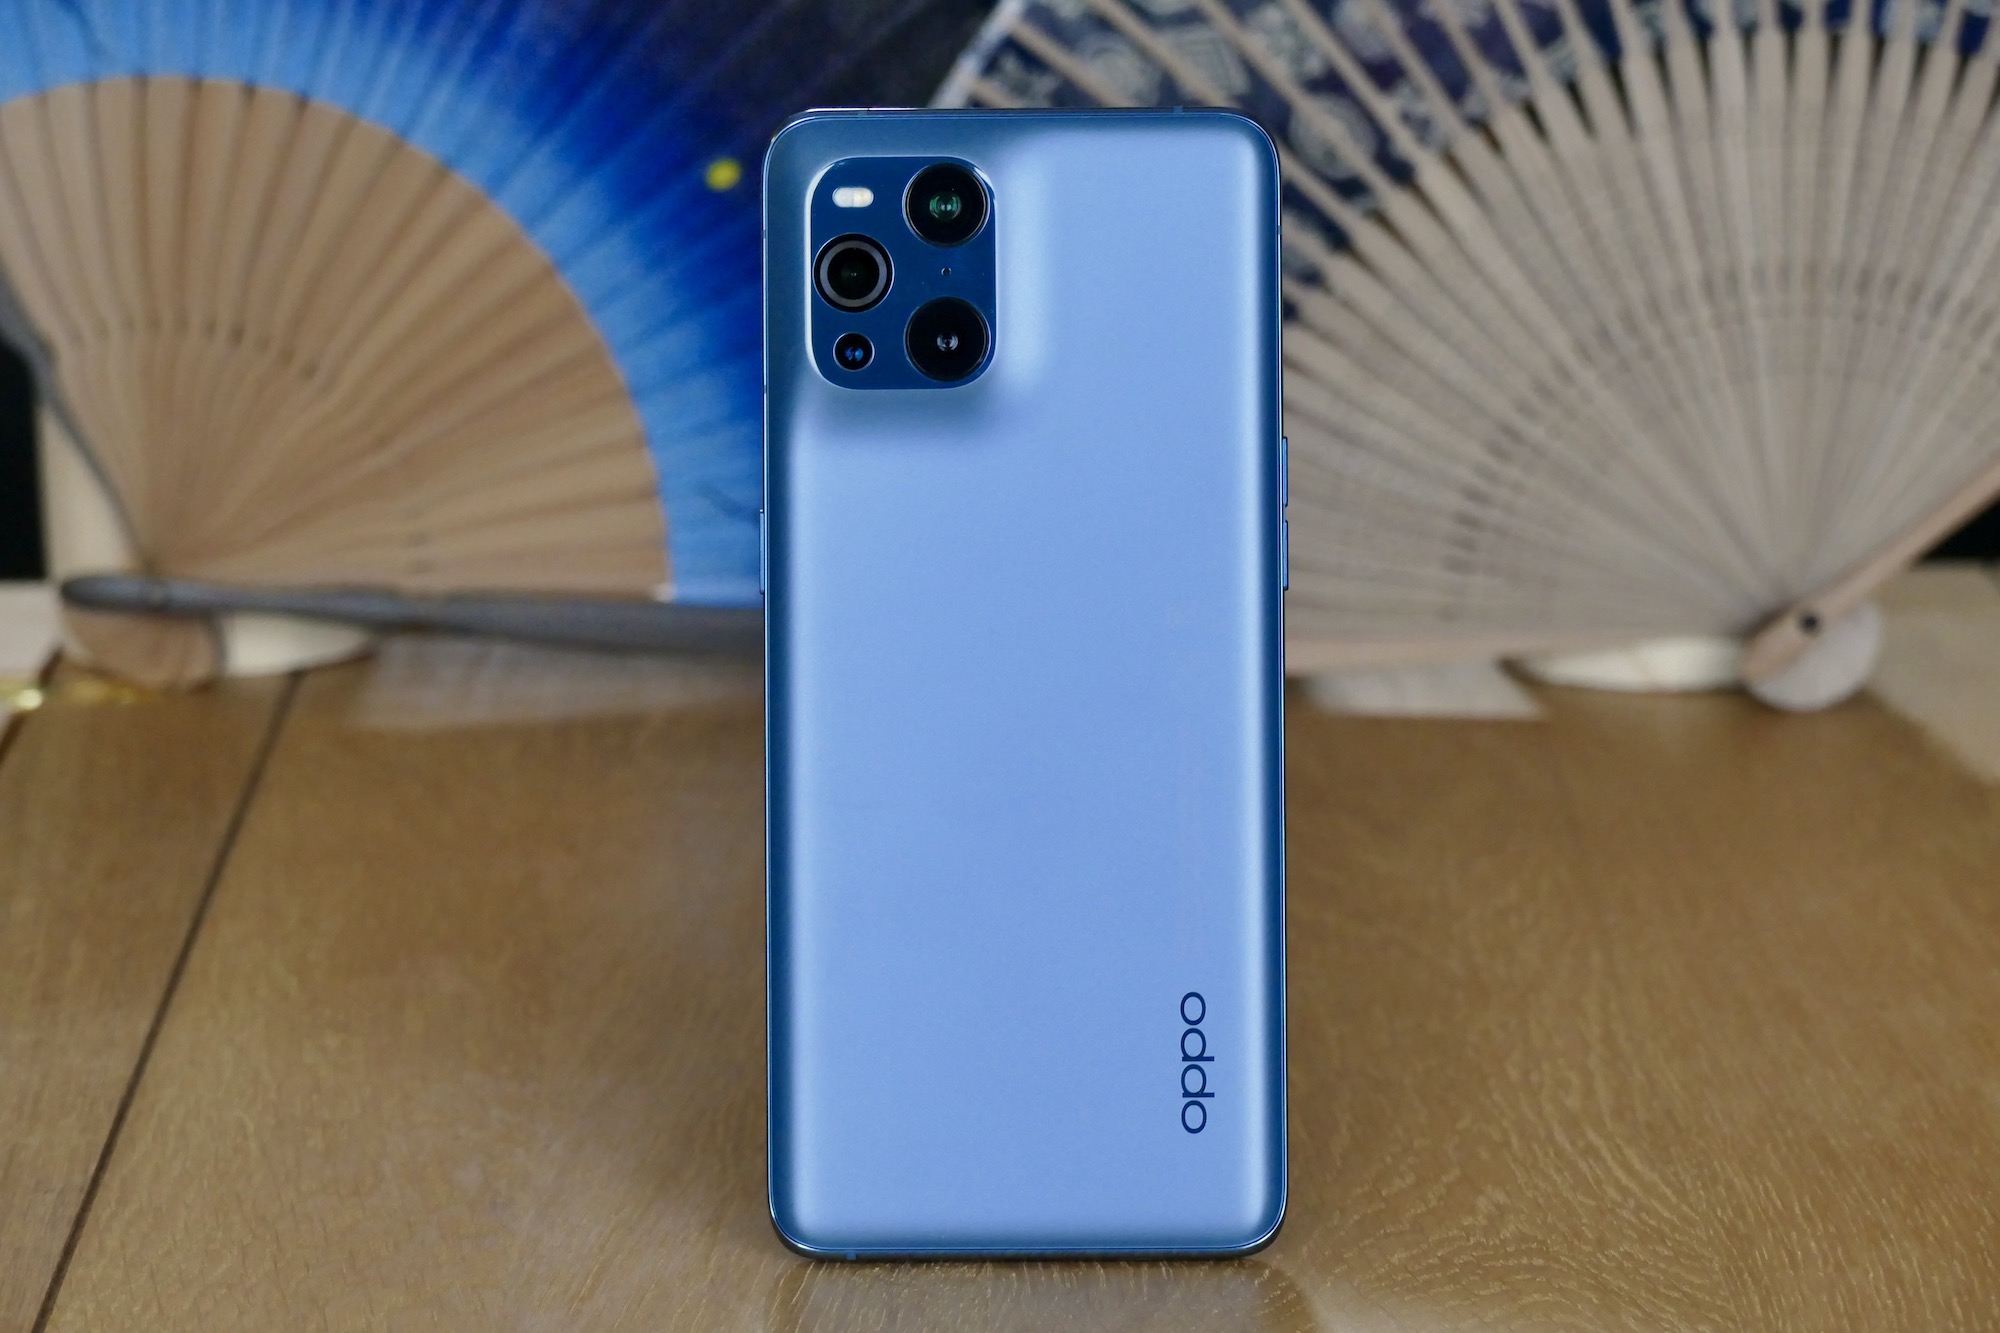 OPPO Find X3 Pro Hands-on Review: Premium Android that's Not a Galaxy